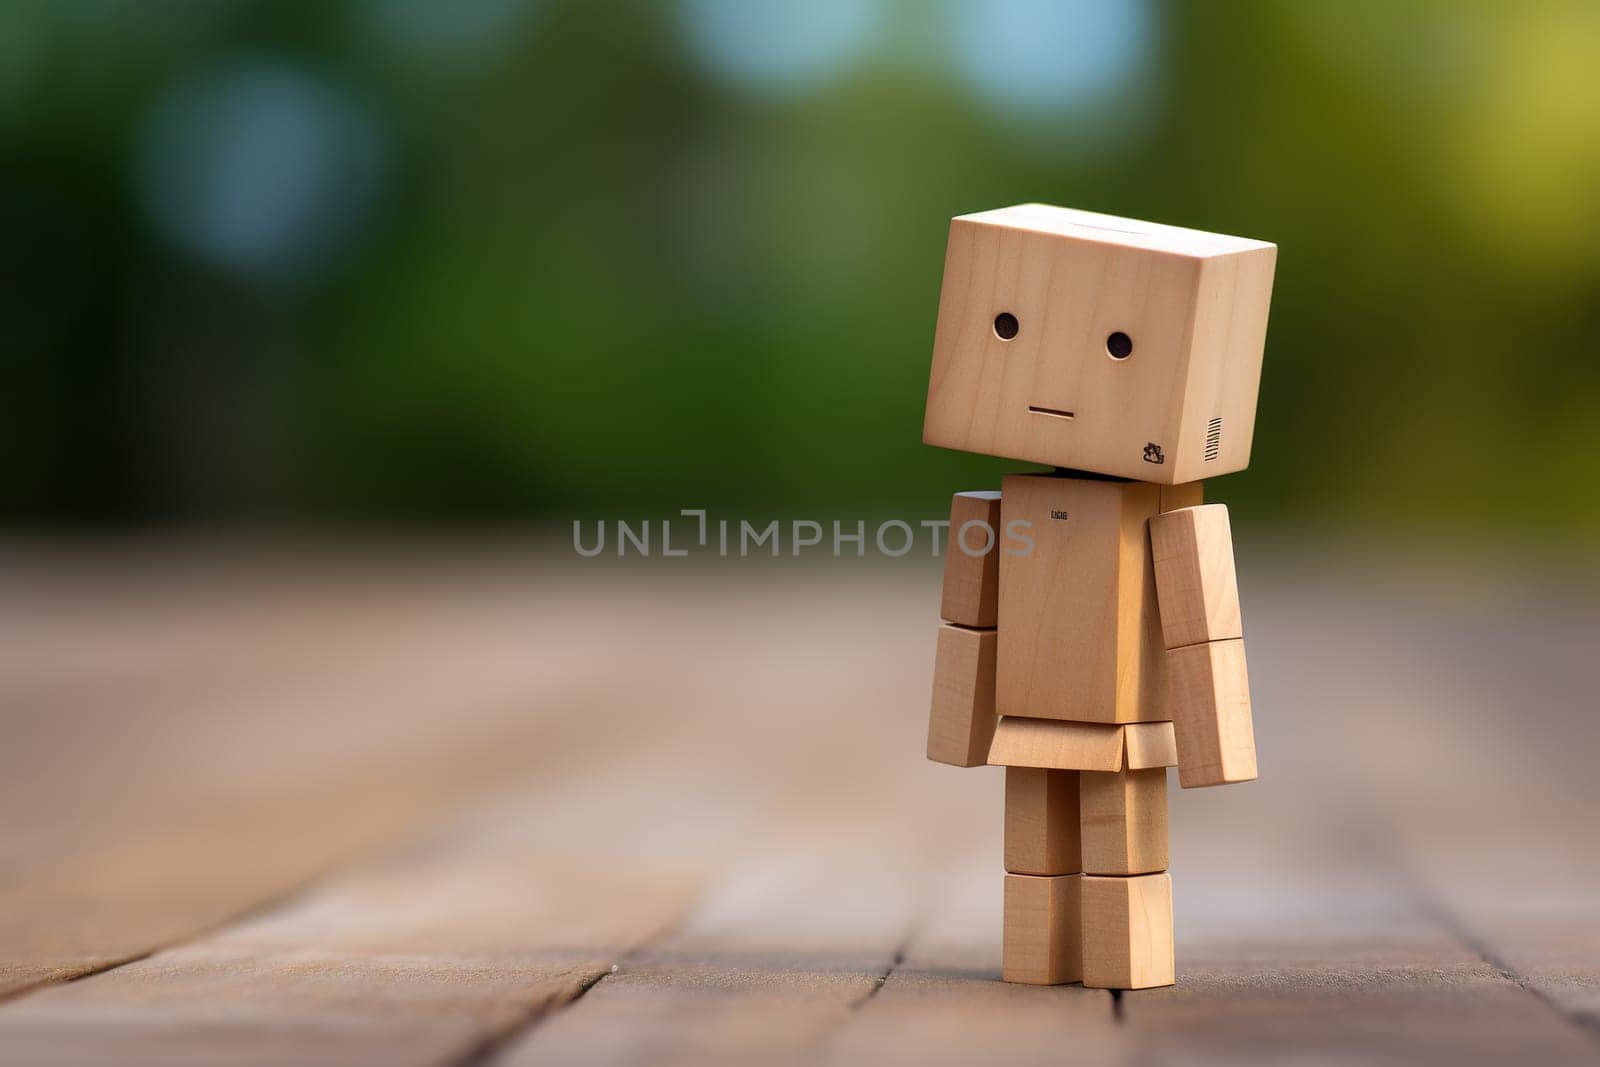 Sad and lonely wooden man on a wooden surface on a blurred natural background. The concept of loneliness, sadness, waiting.